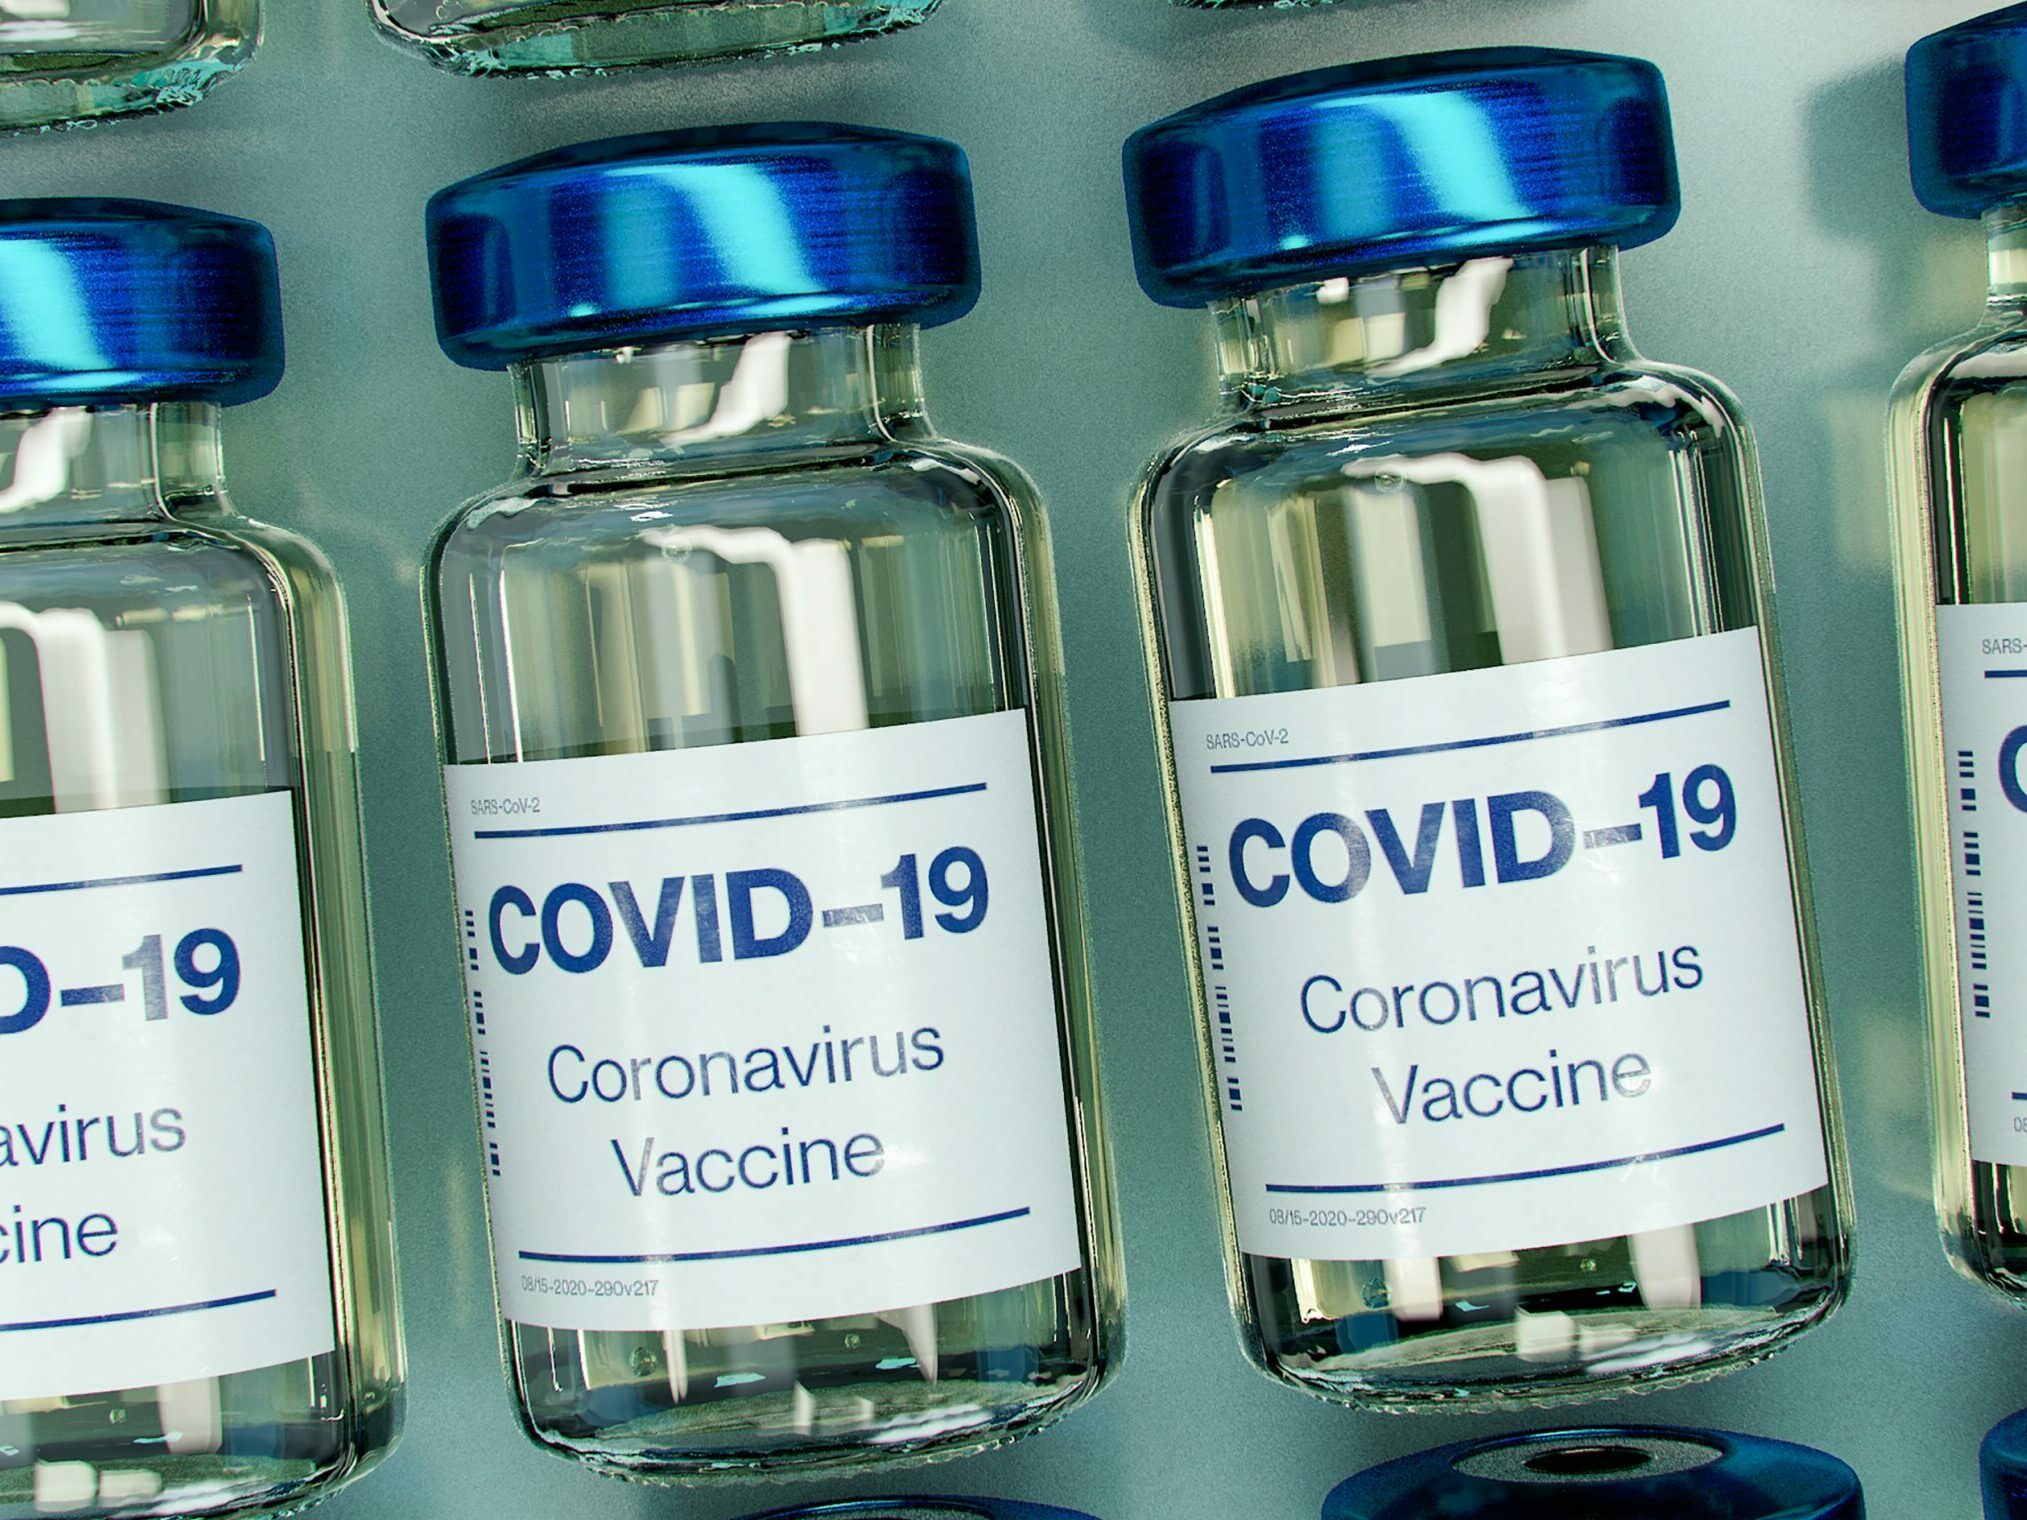 Covid-19 Vaccine Bottle Mockup (does not depict actual vaccine).